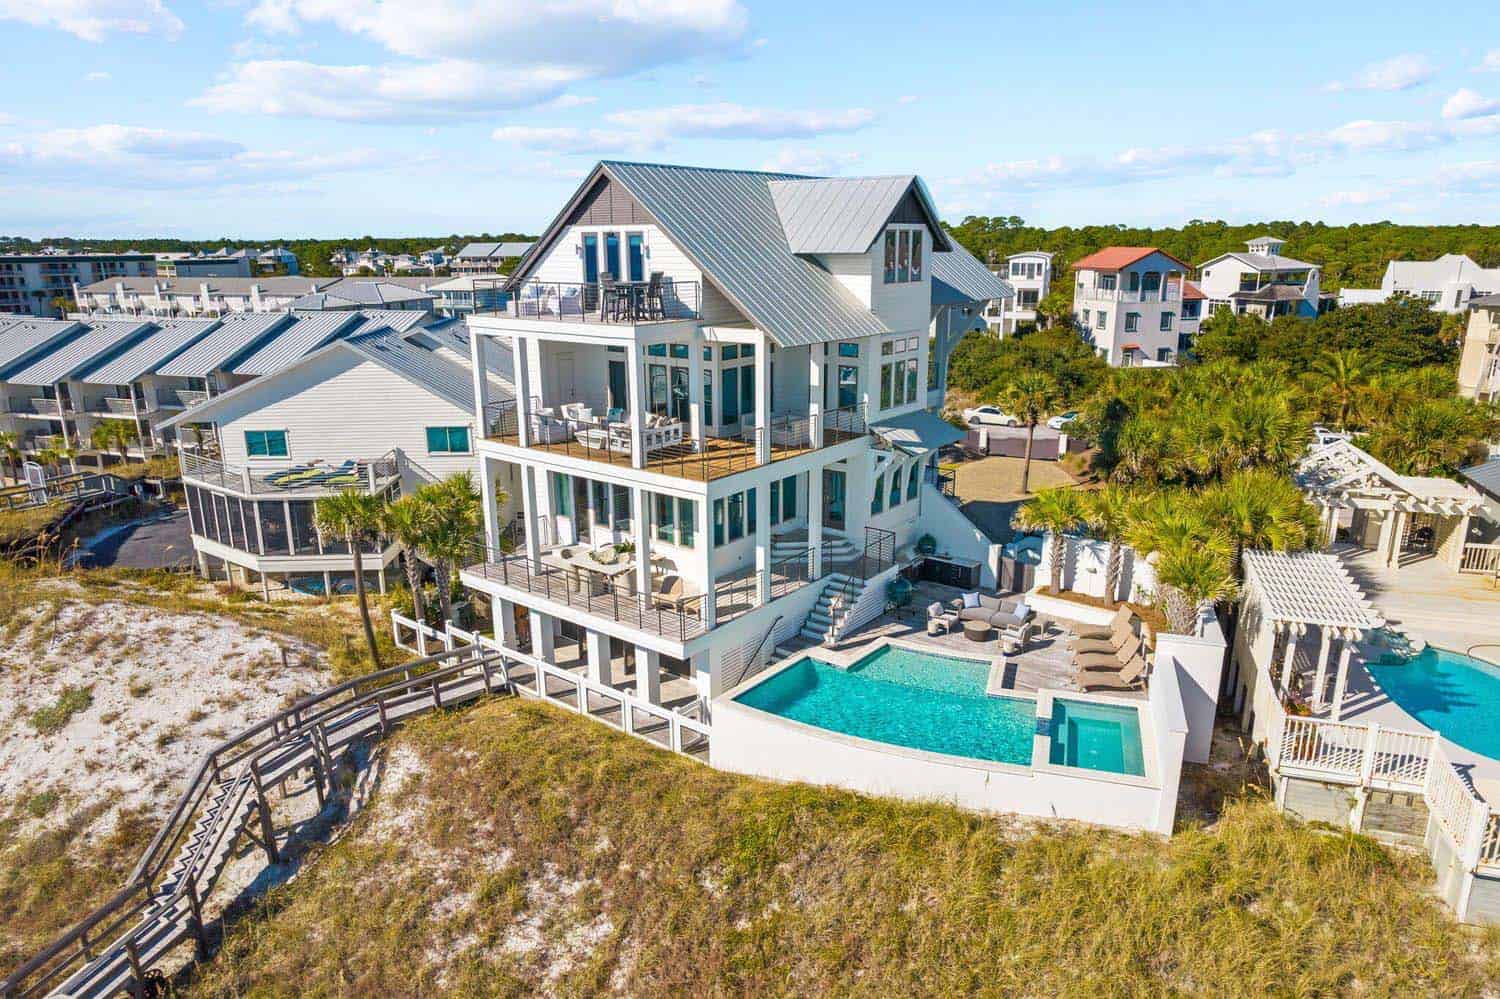 This timeless beach house boasts fantastic views of the Gulf of Mexico